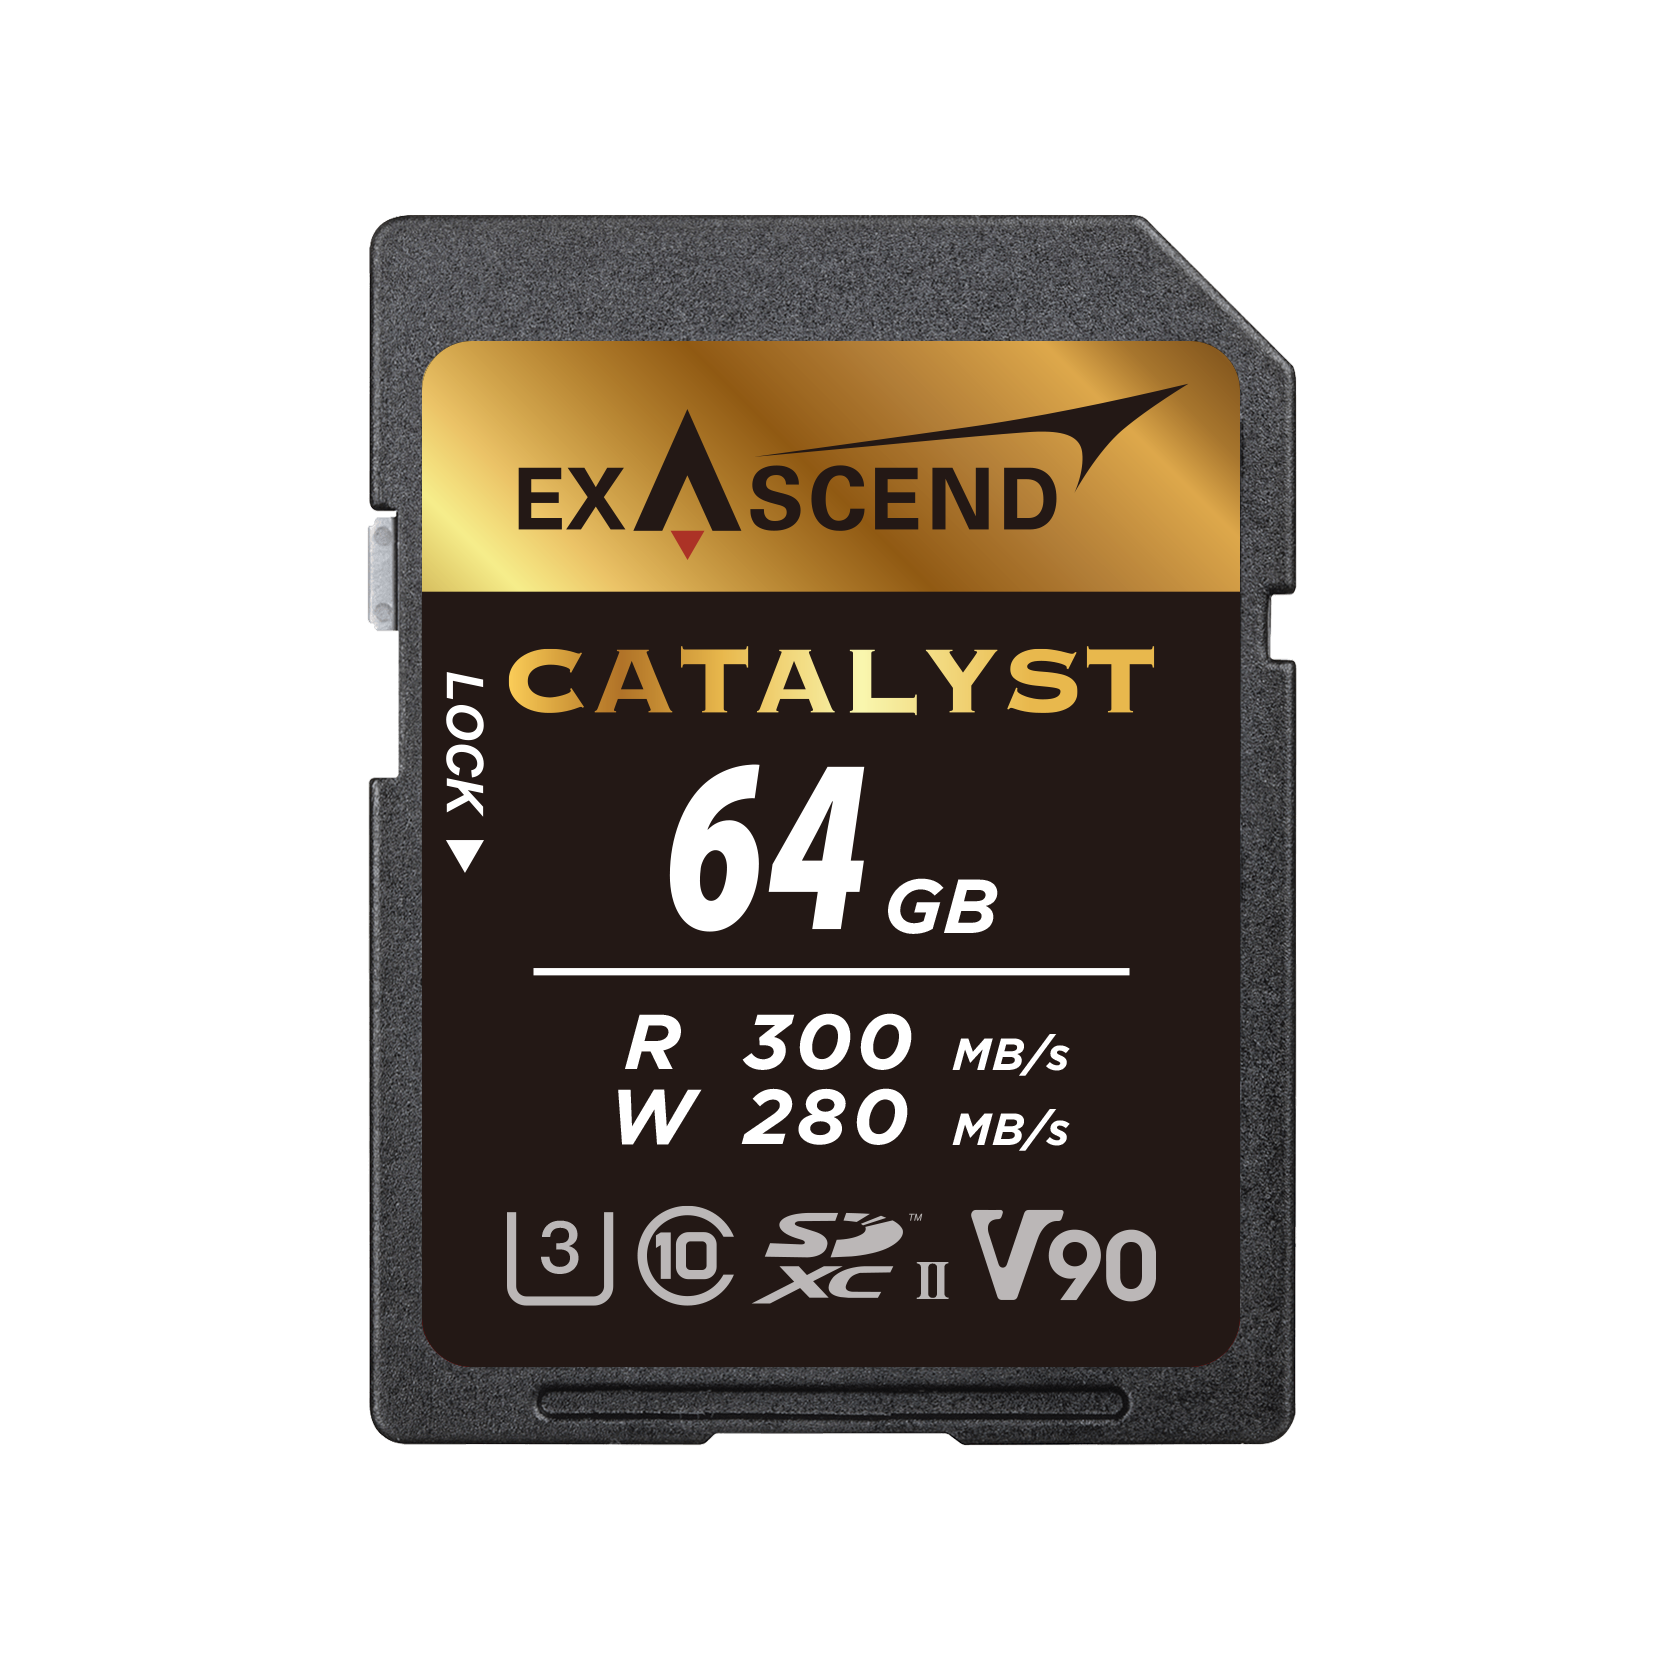 Catalyst V90 SD Card 64GB.png